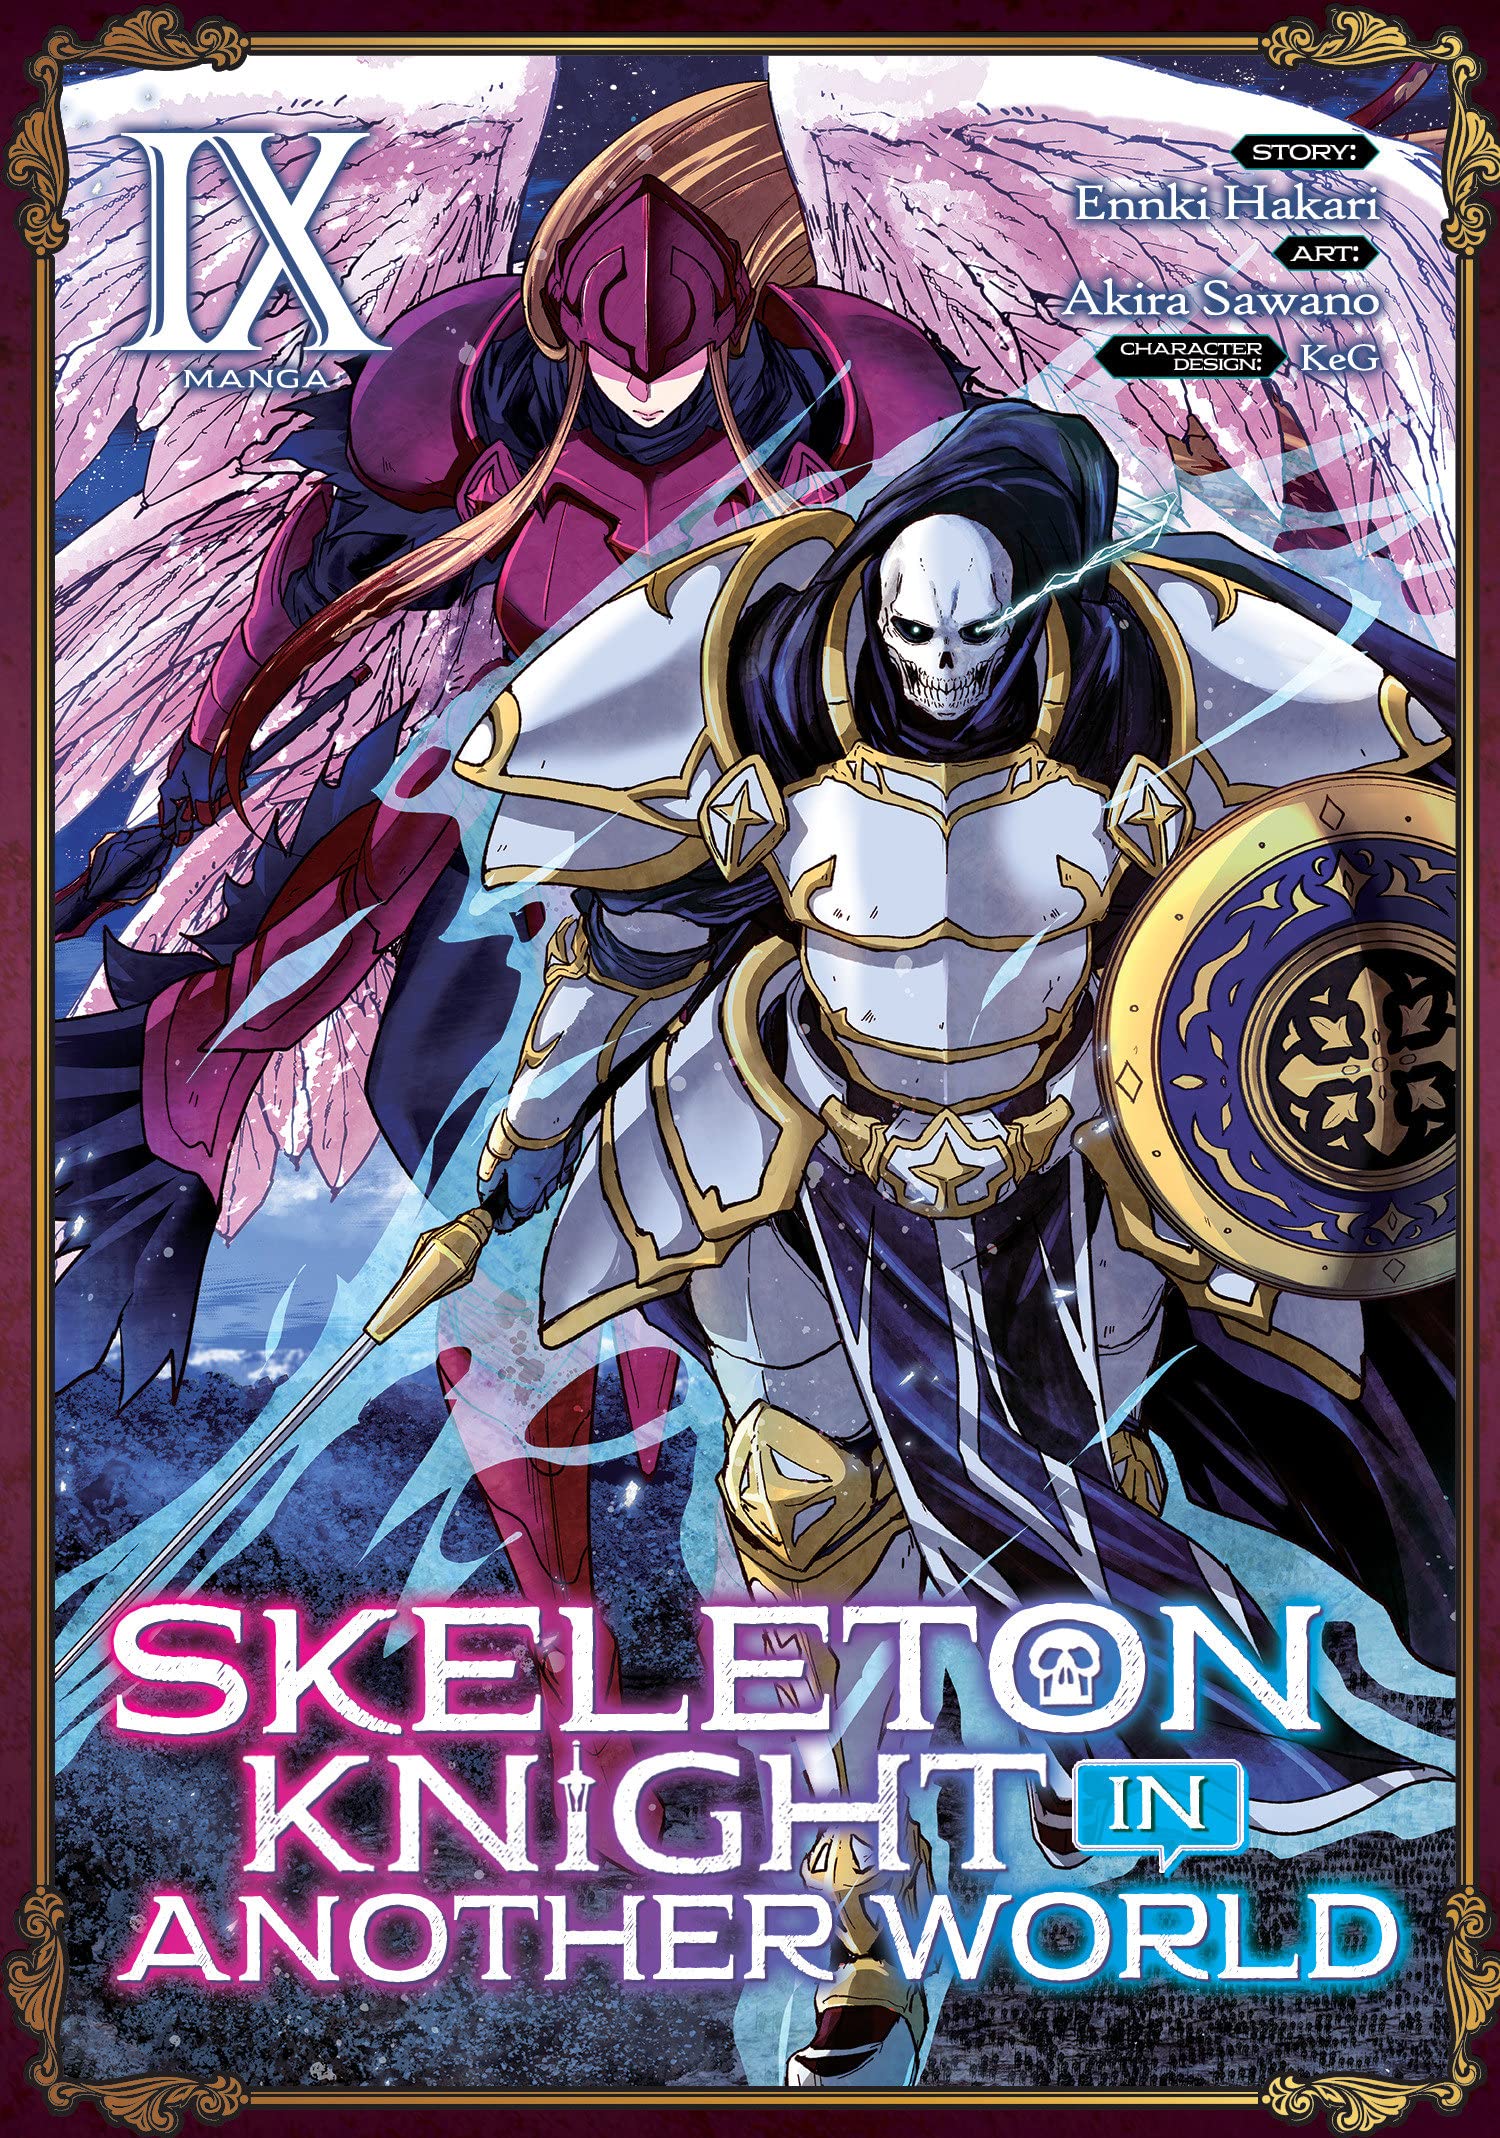 Skeleton Knight in Another World (Manga) Vol. 09